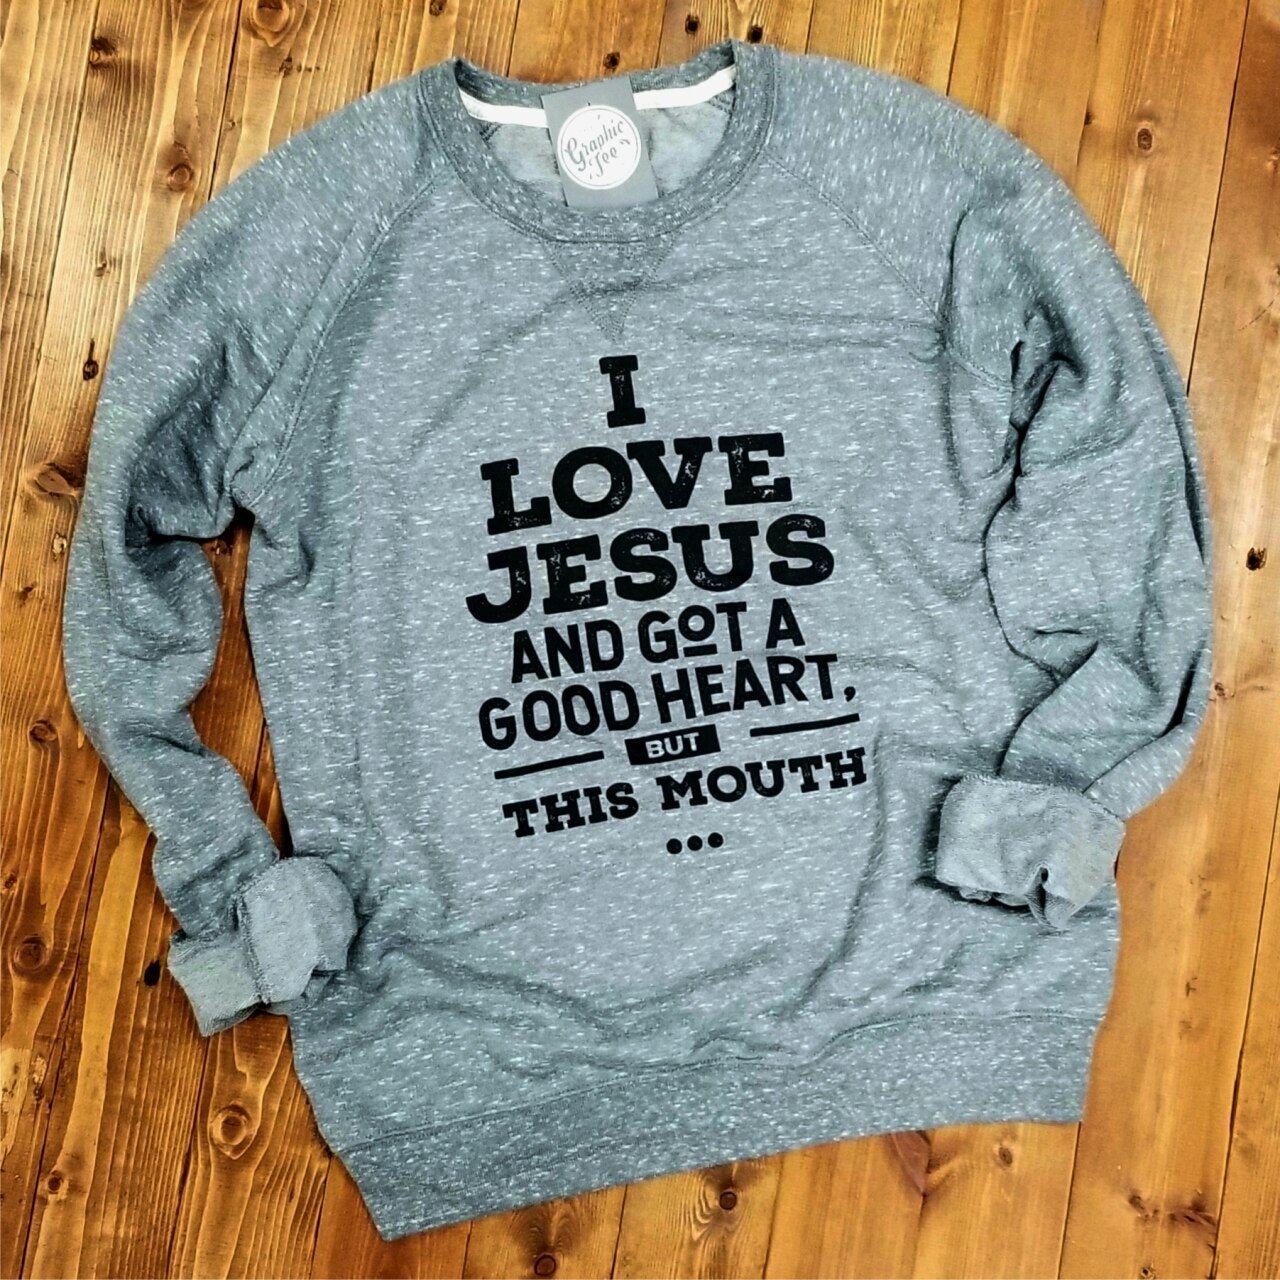 I Love Jesus and Got a Good Heart, but This Mouth - Crewneck Sweatshirt - The Graphic Tee